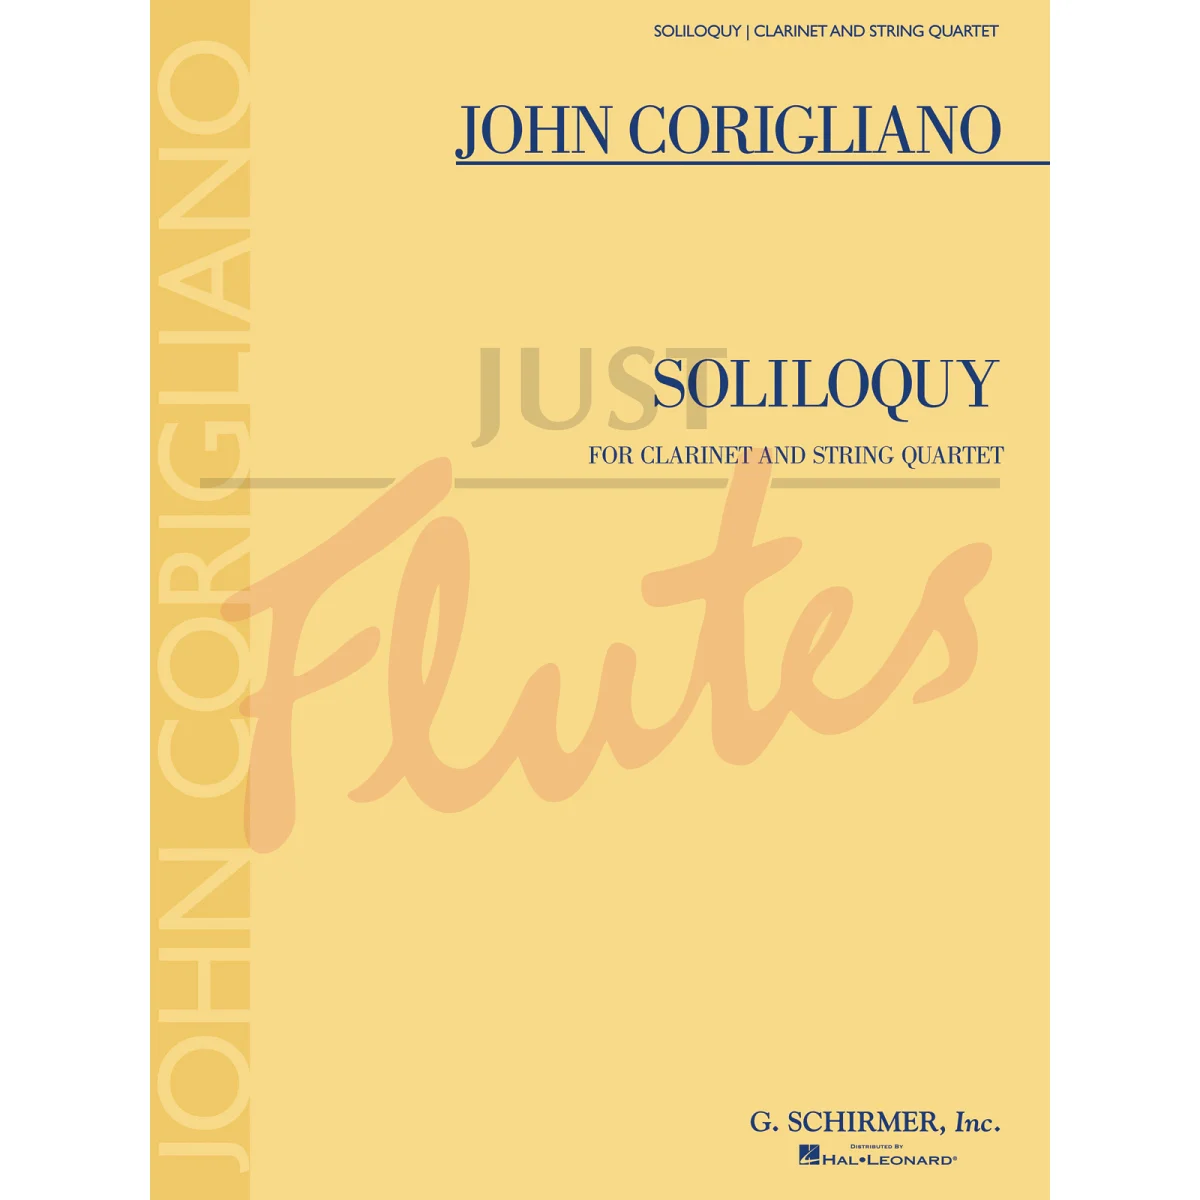 Soliloquy for Clarinet and String Quartet